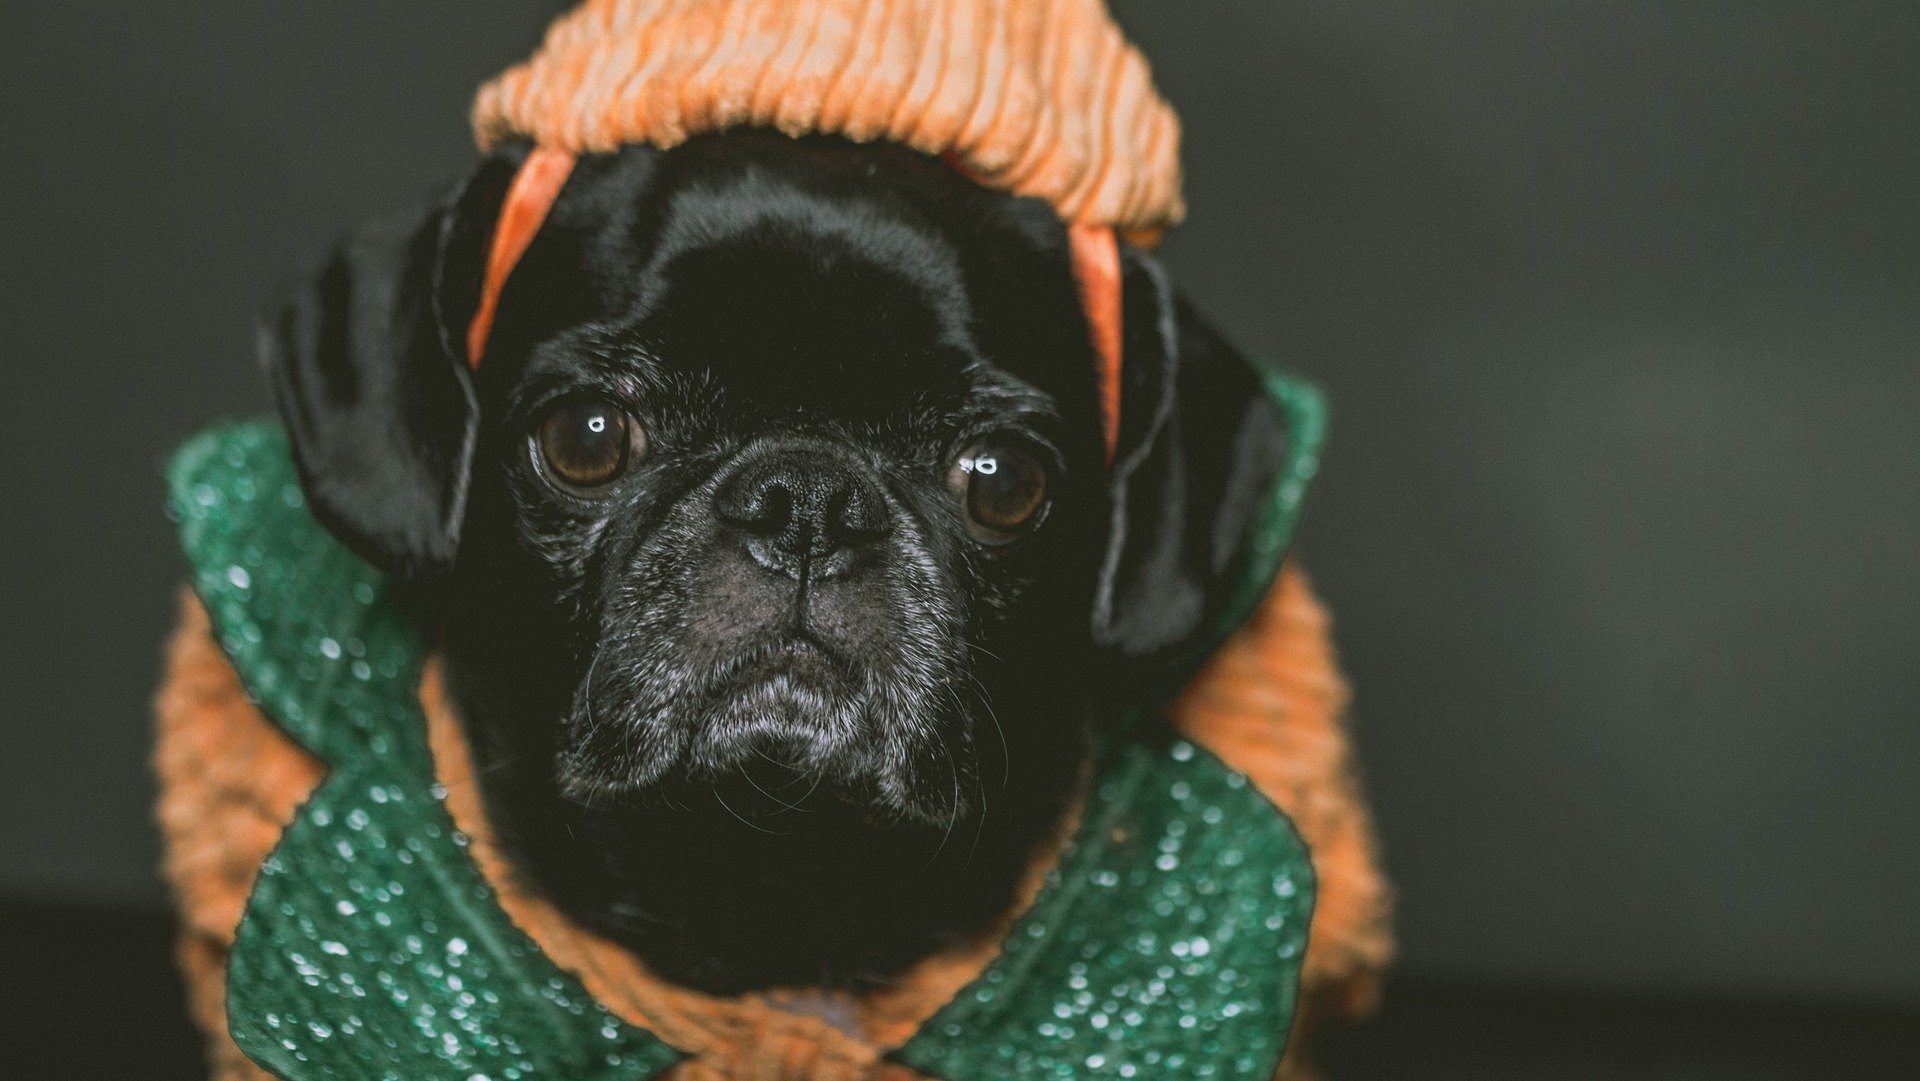 NATIONAL DRESS UP YOUR PET DAY Cover Photo